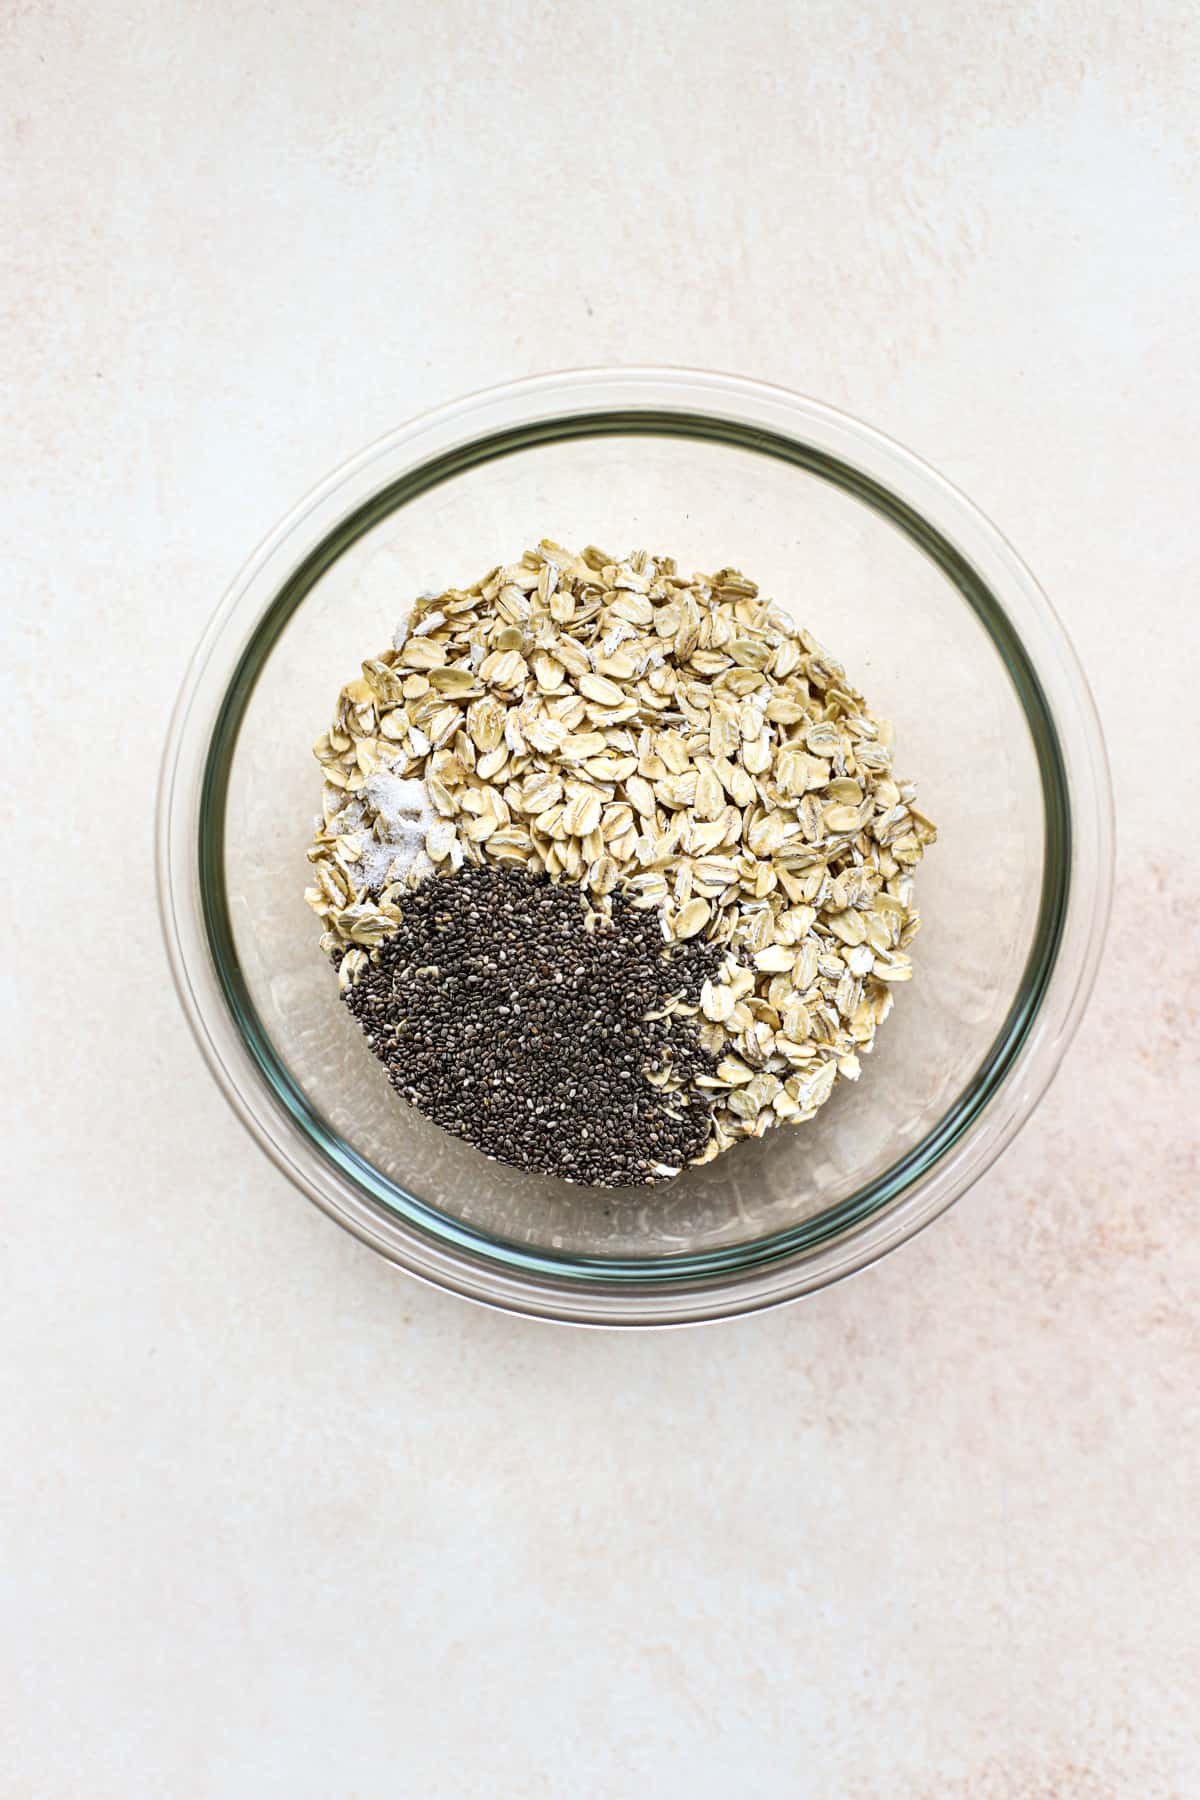 Oats, chia seeds, and salt in clear glass bowl on beige and white surface